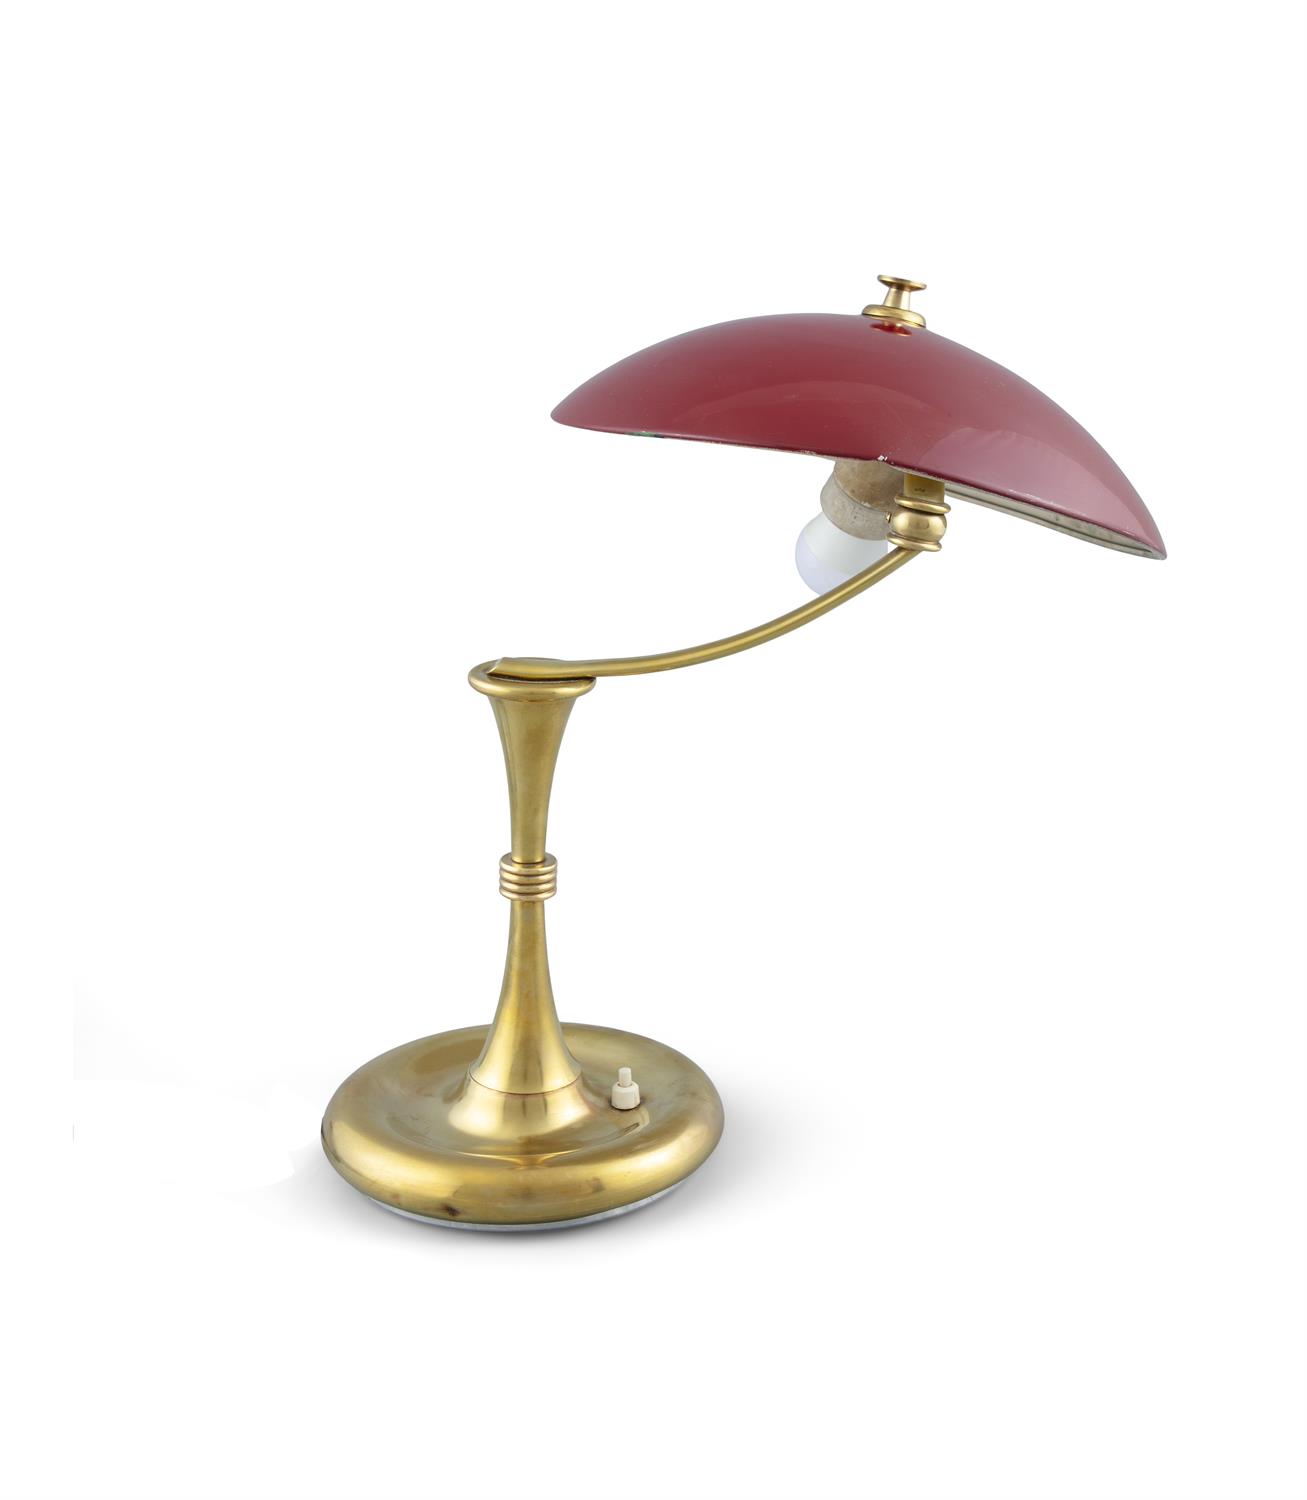 LAMP A brass and enamel desk lamp, Italy c.1960. 39cm (h) - Image 3 of 4